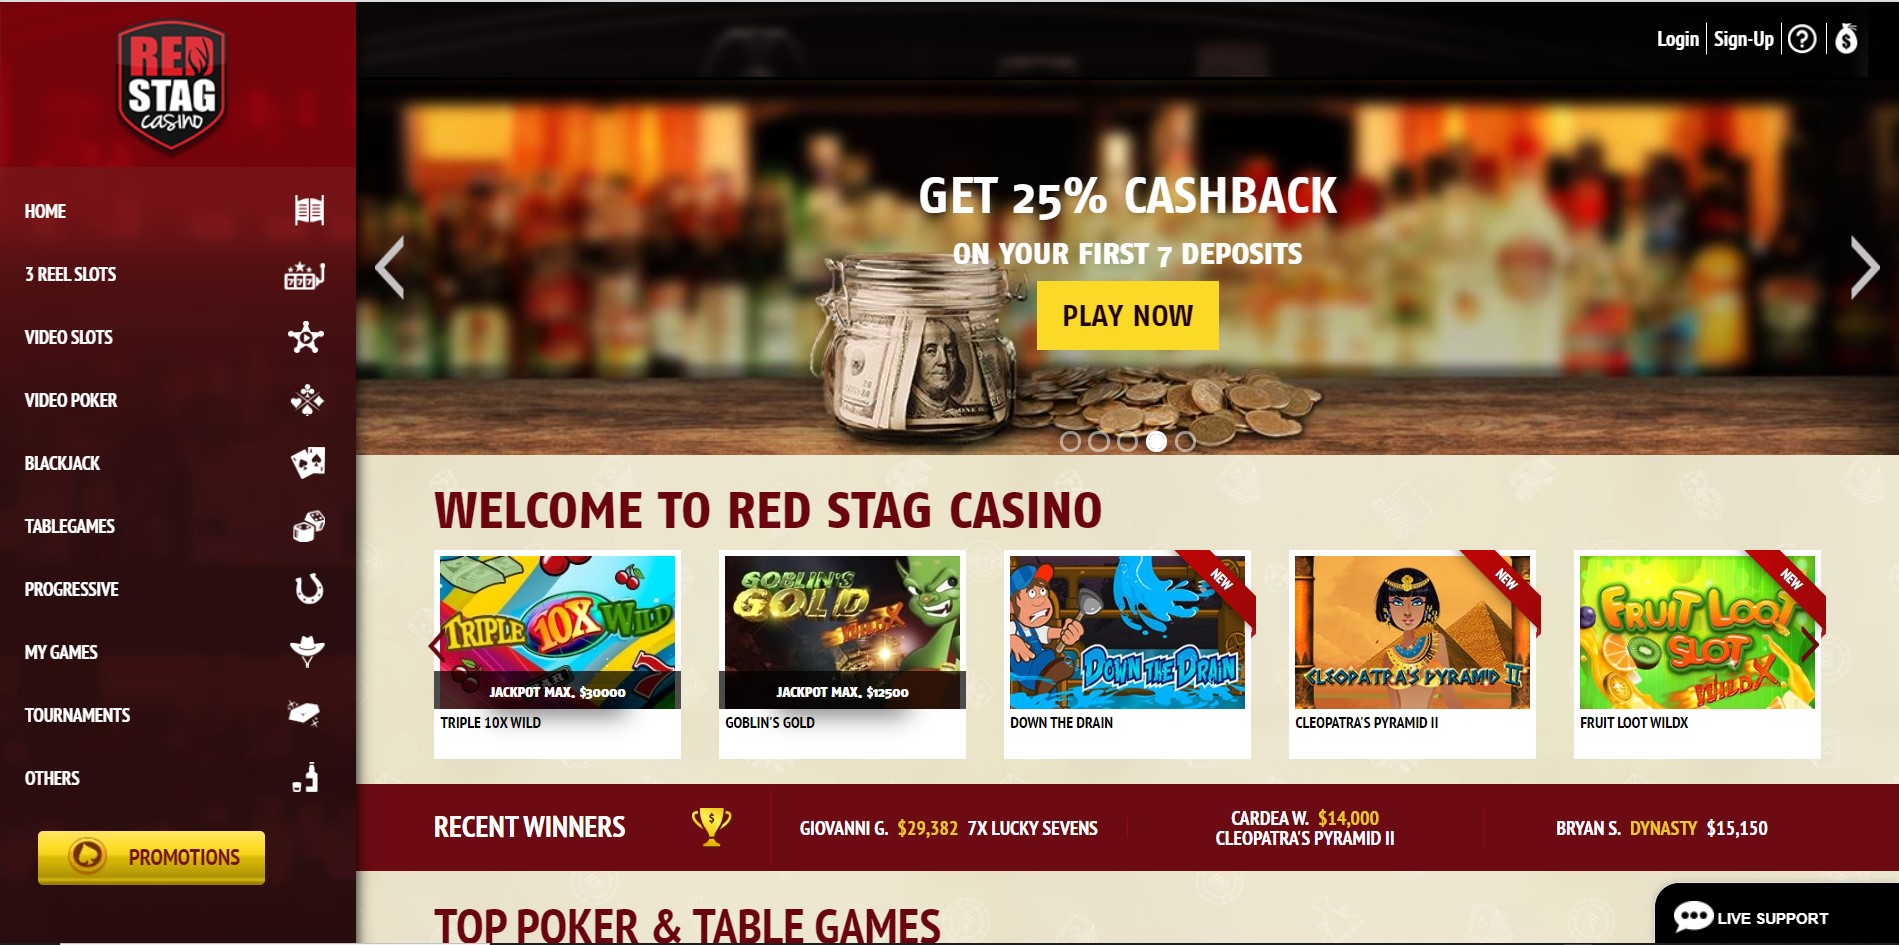 red stag casino bonus for existing players